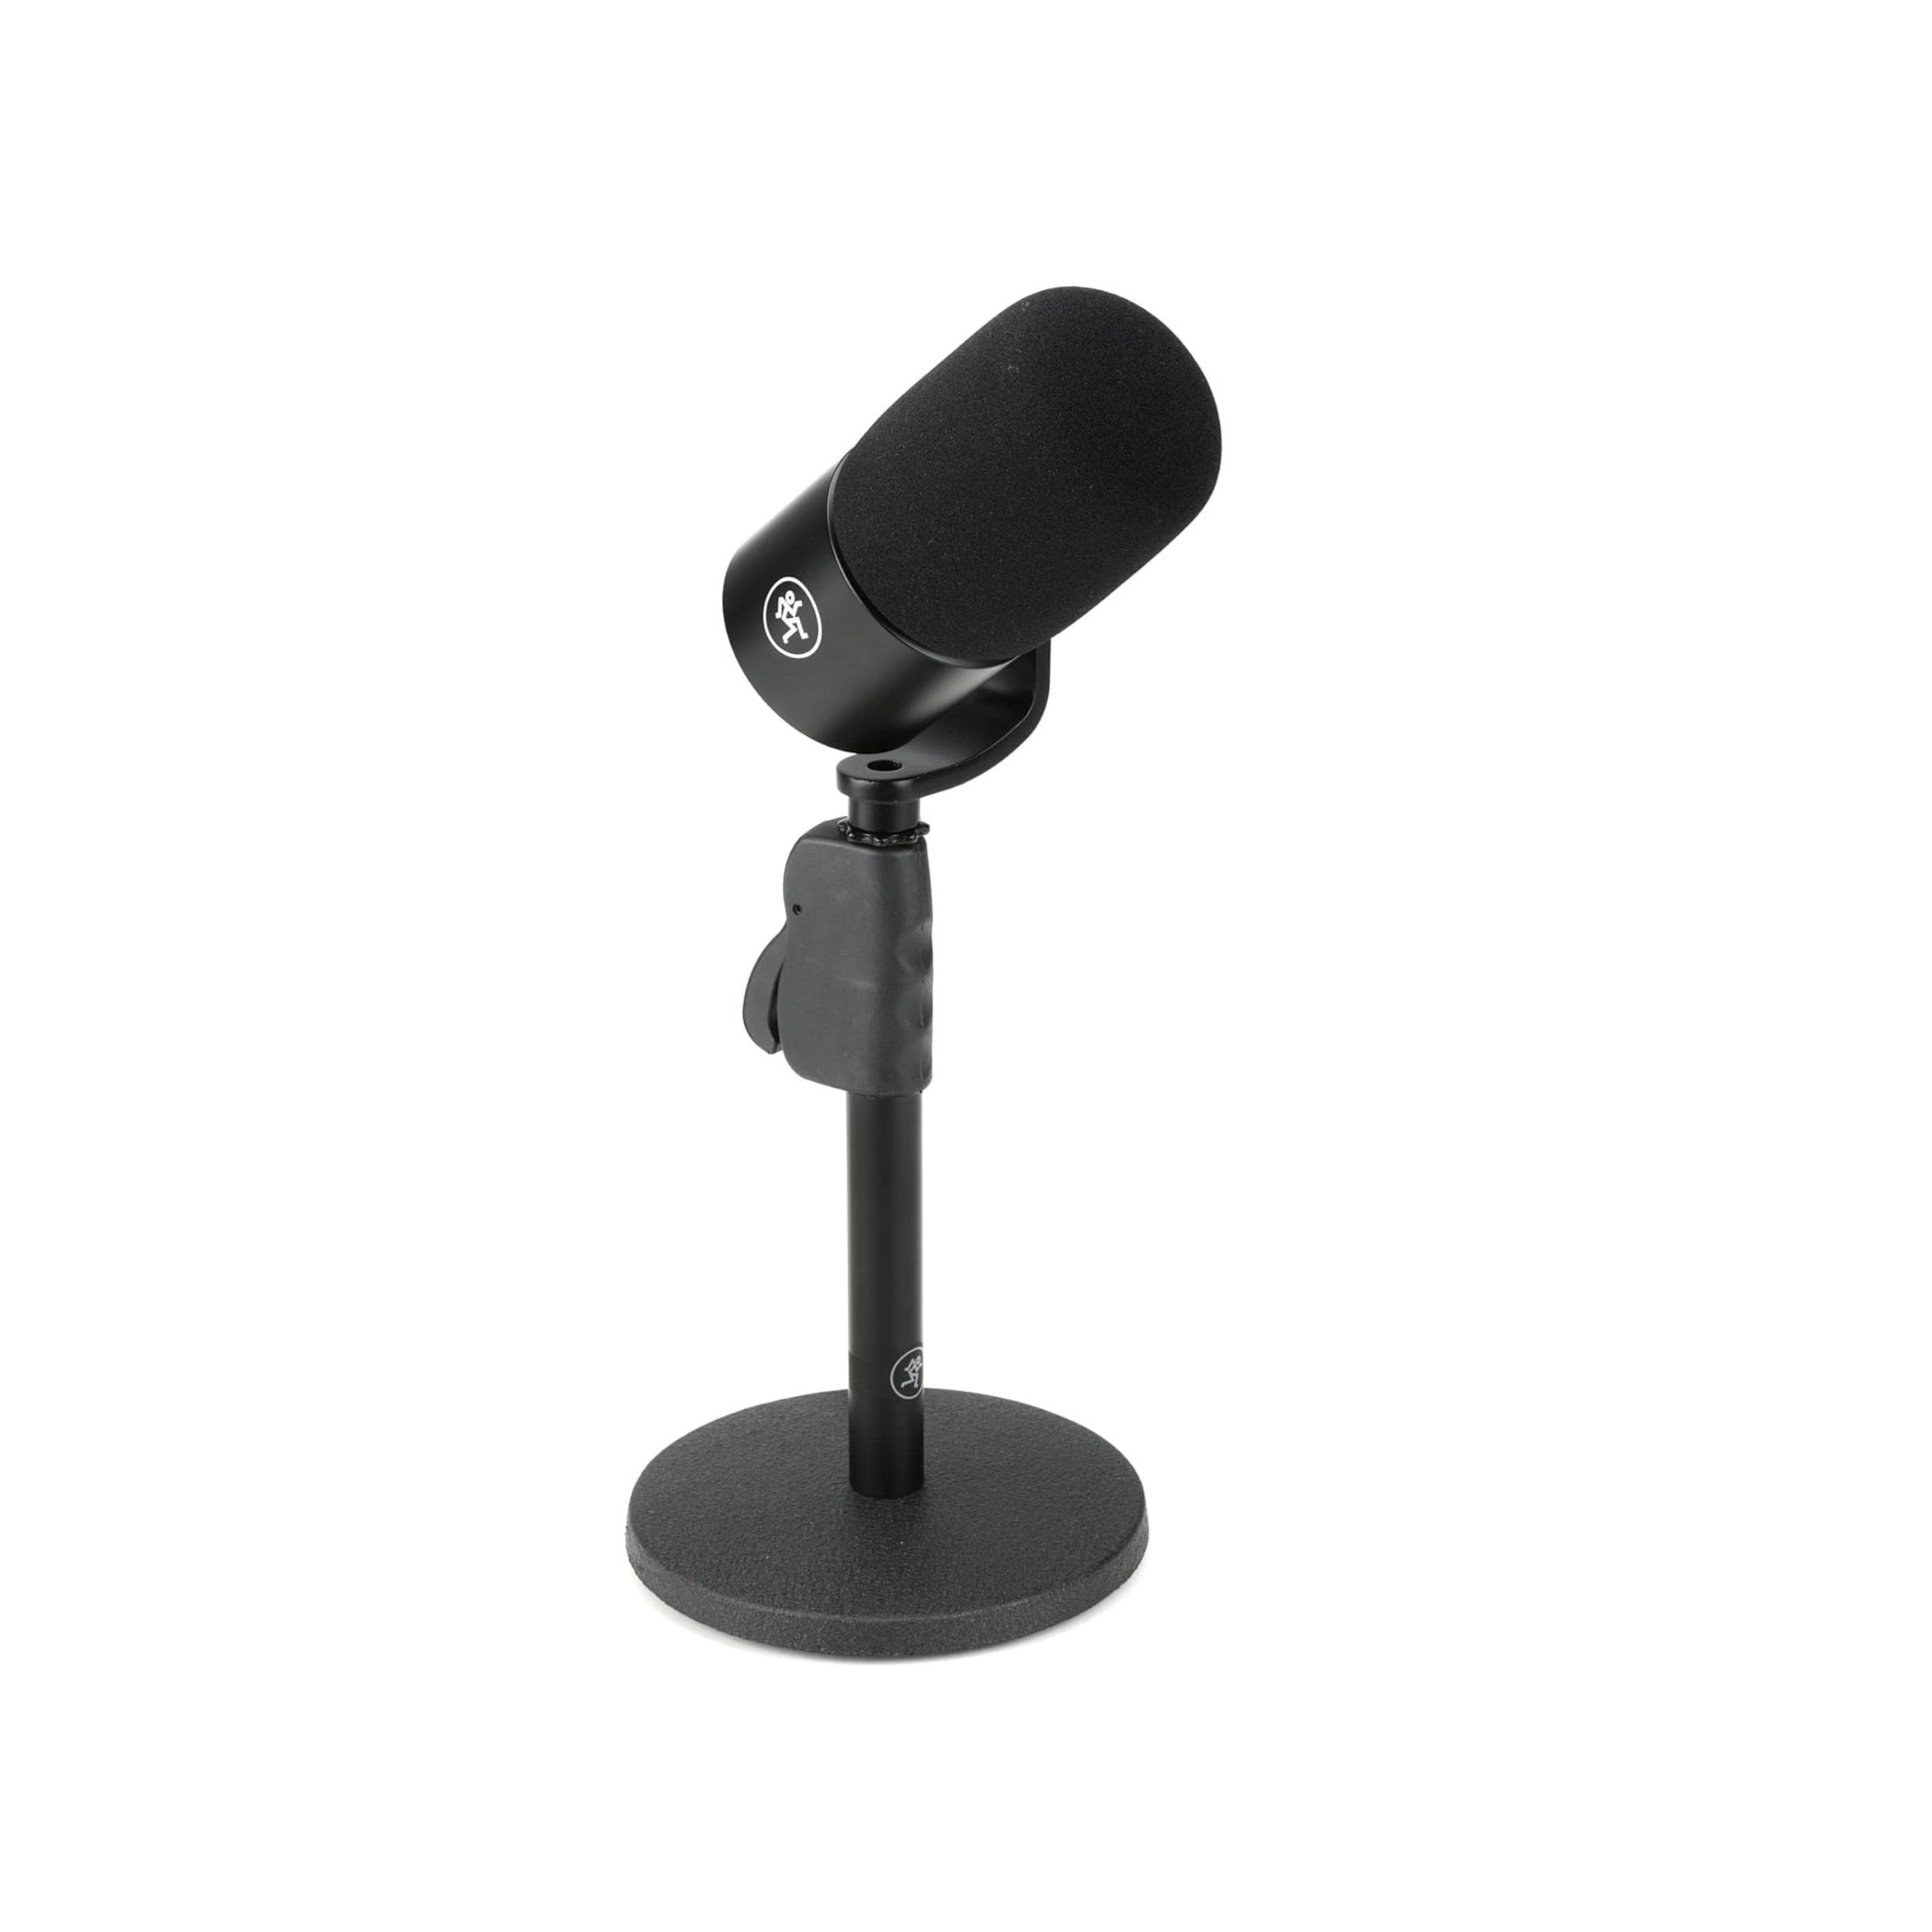 Mackie - EM-99B Dynamic Broadcast Microphone with Desktop Stand and XLR Cable Included